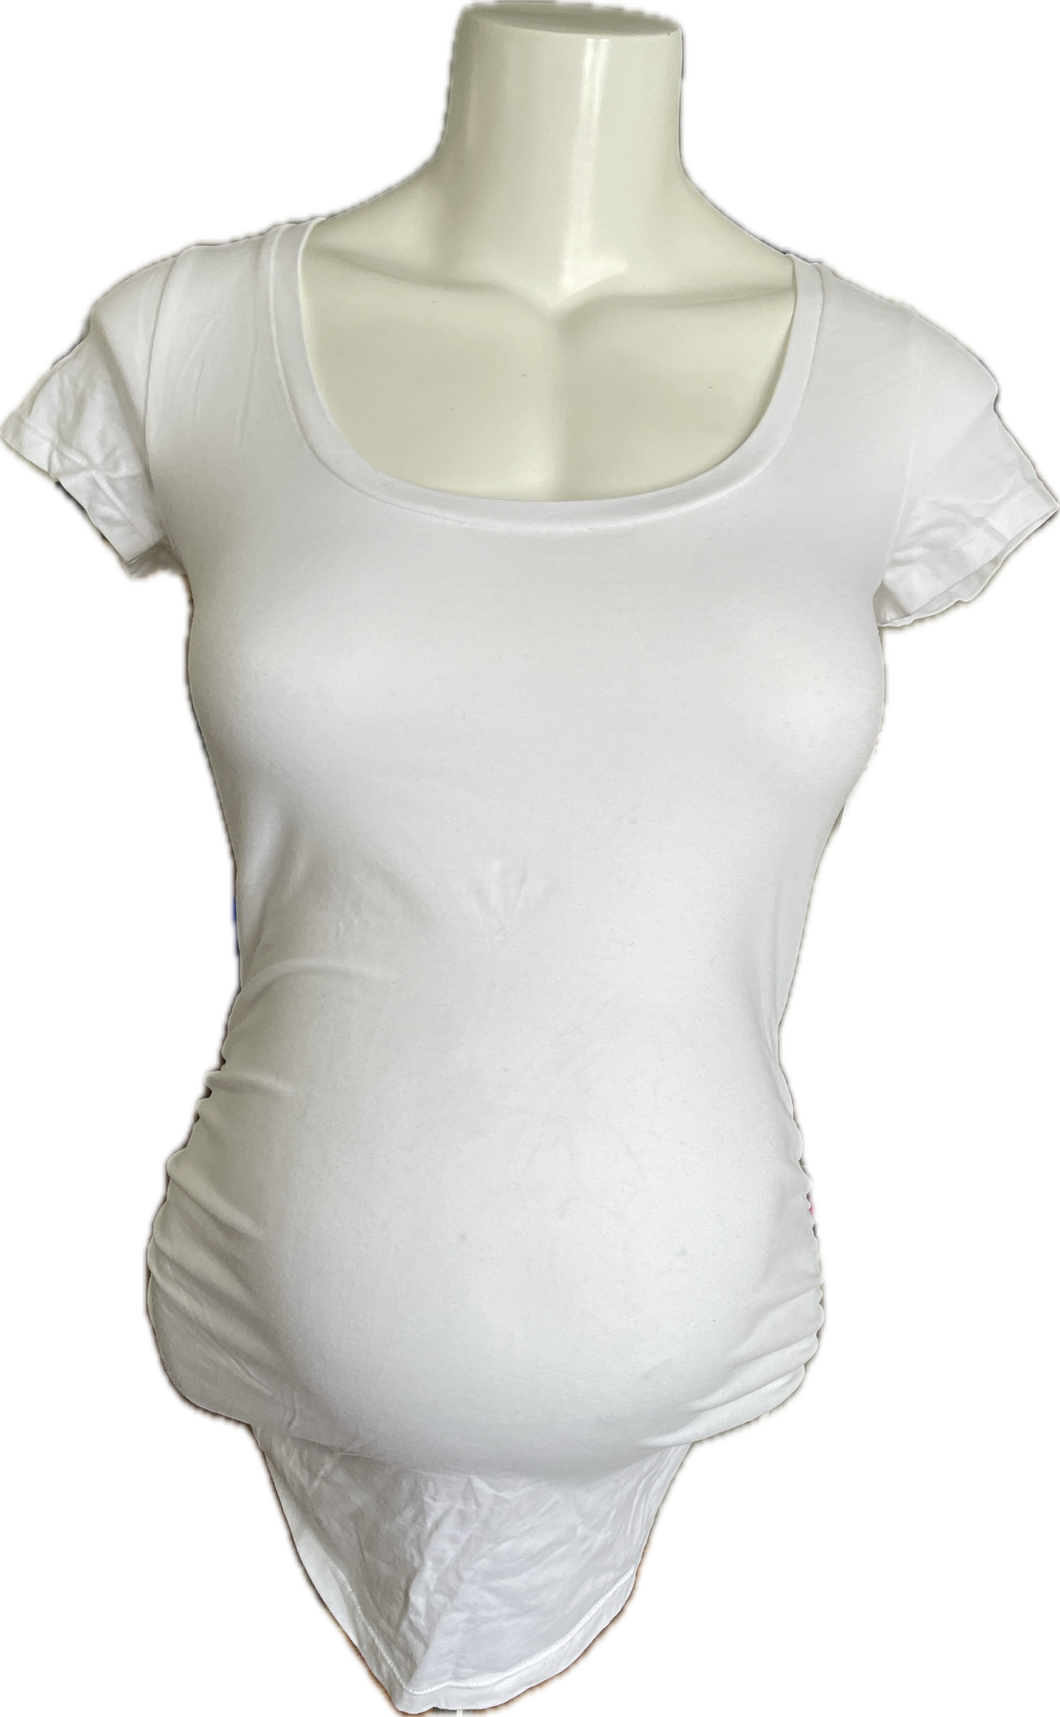 XS Old Navy Maternity Short Sleeve top in White